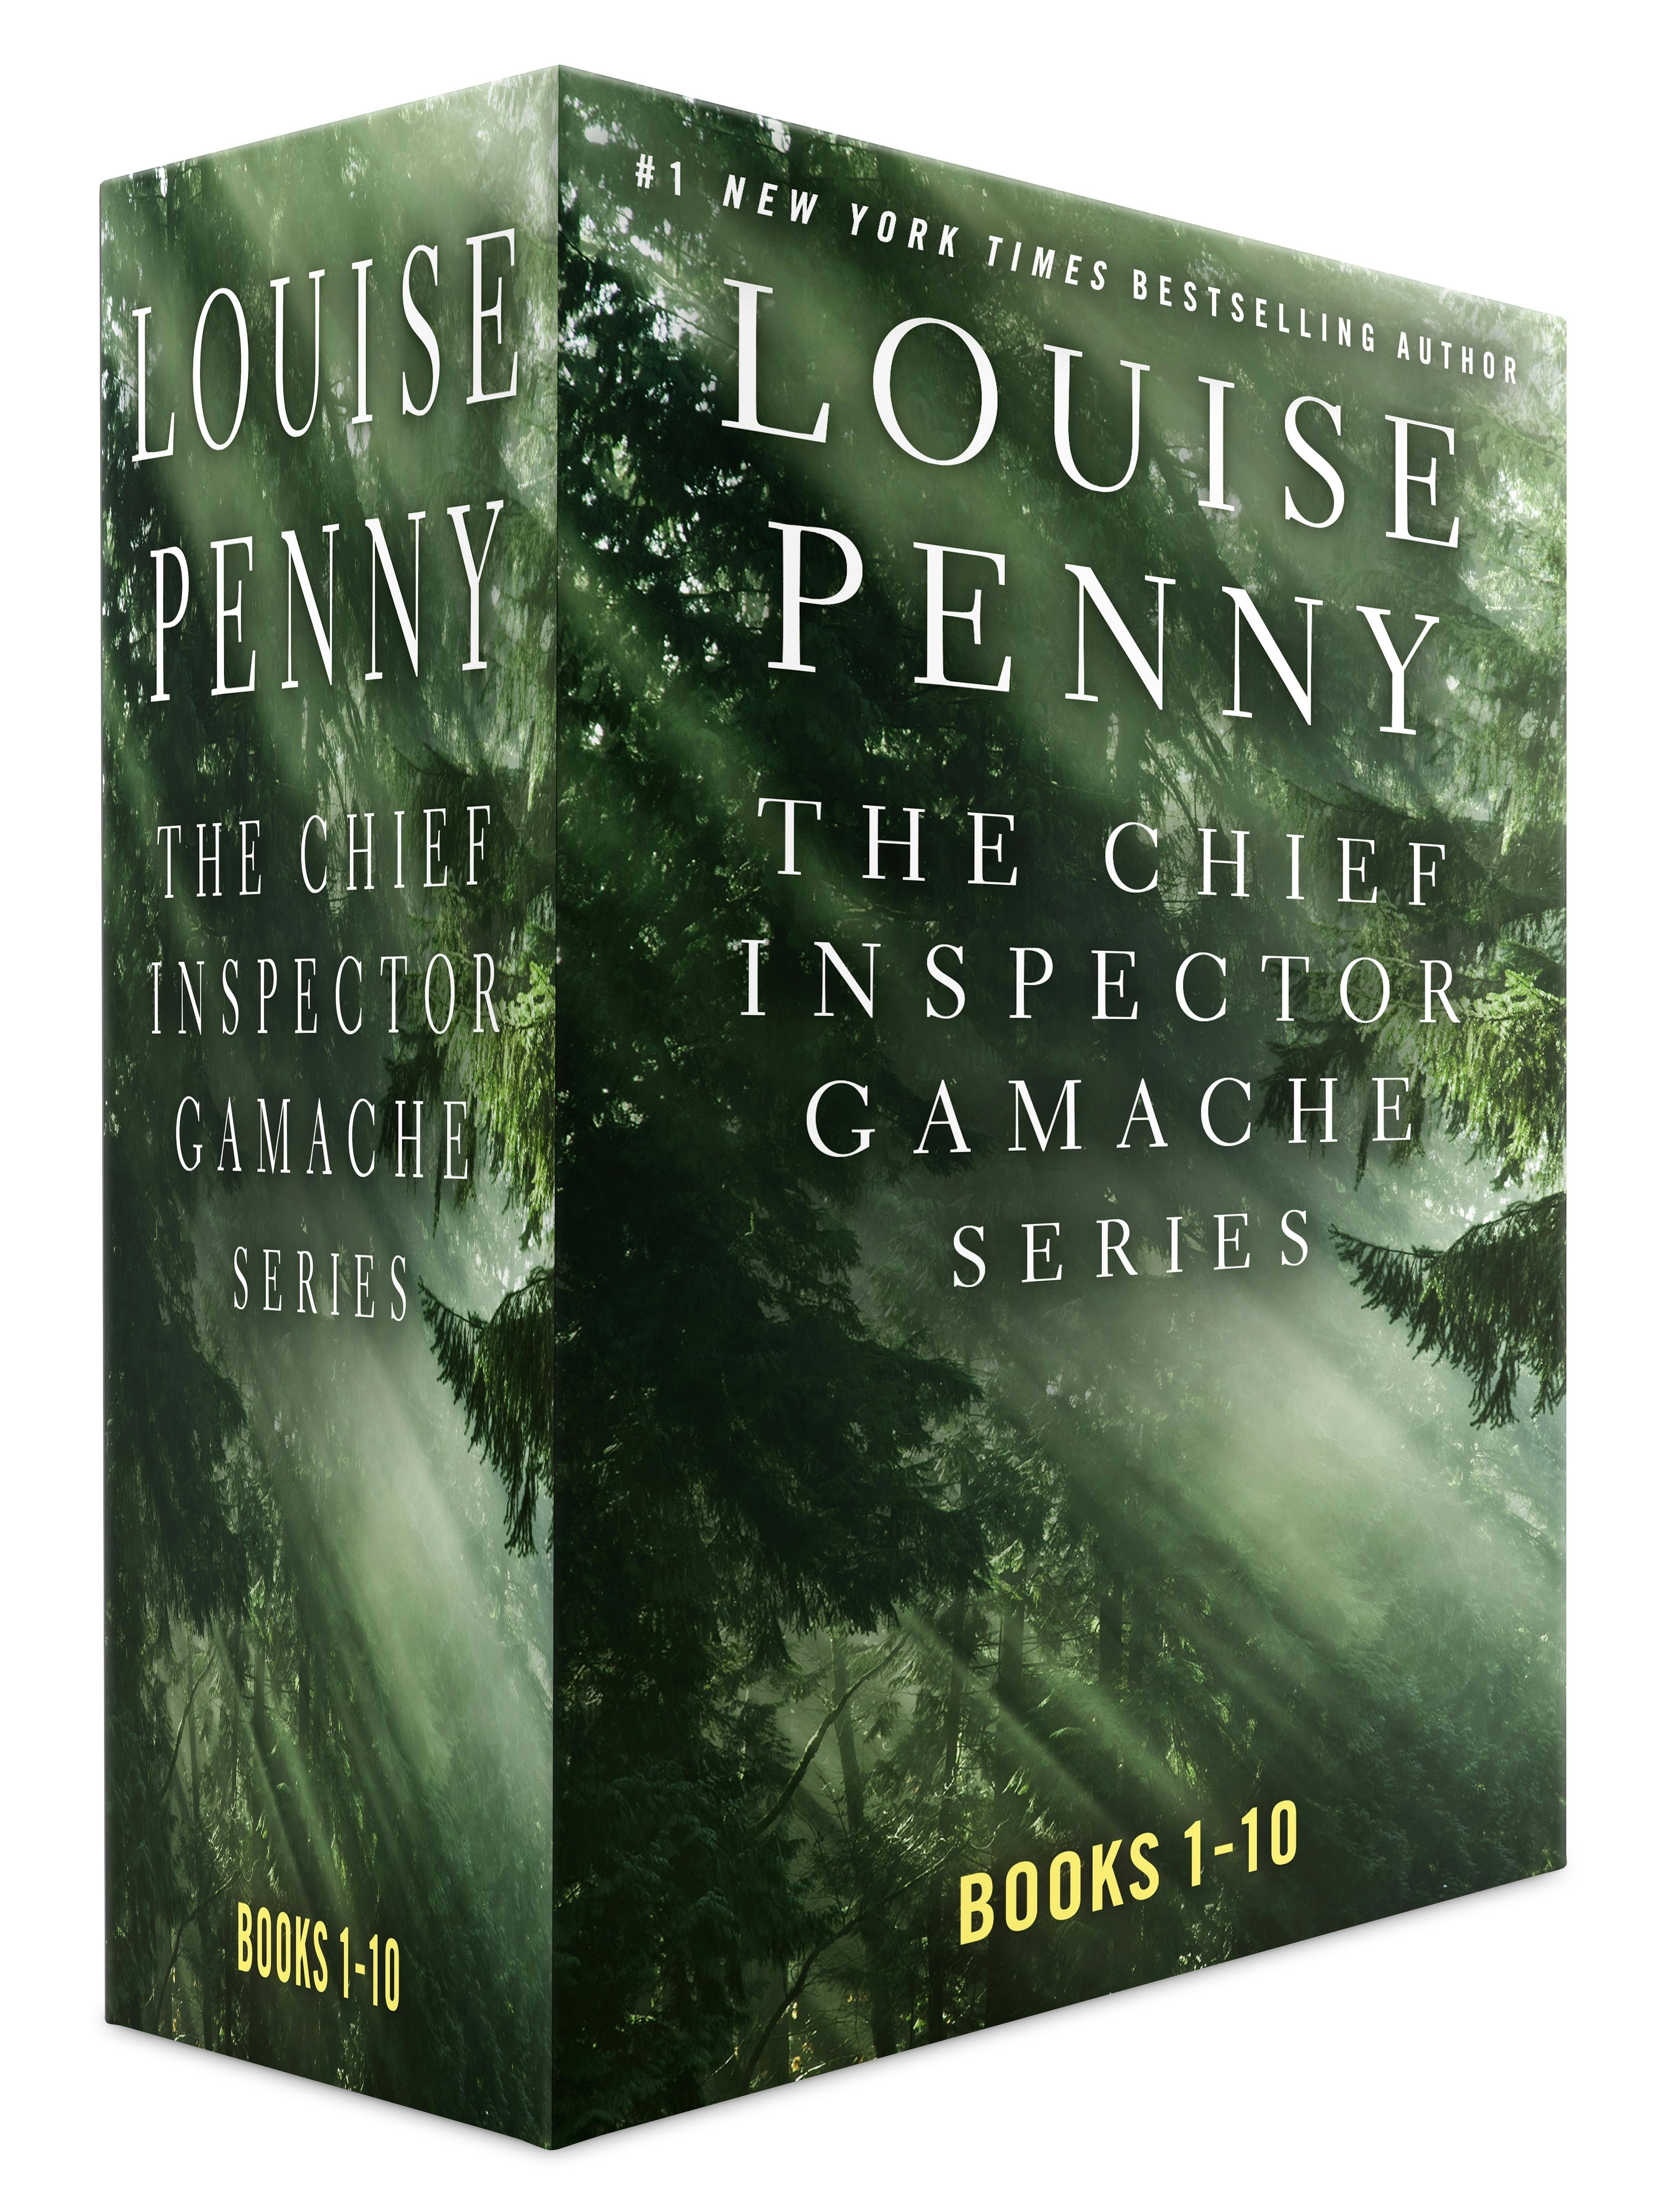 The Chief Inspector Gamache Series Books 6 - 10 Collection Box Set by Louise Penny (Bury Your Dead, A Trick of The Light, Beautiful Mystery, How The